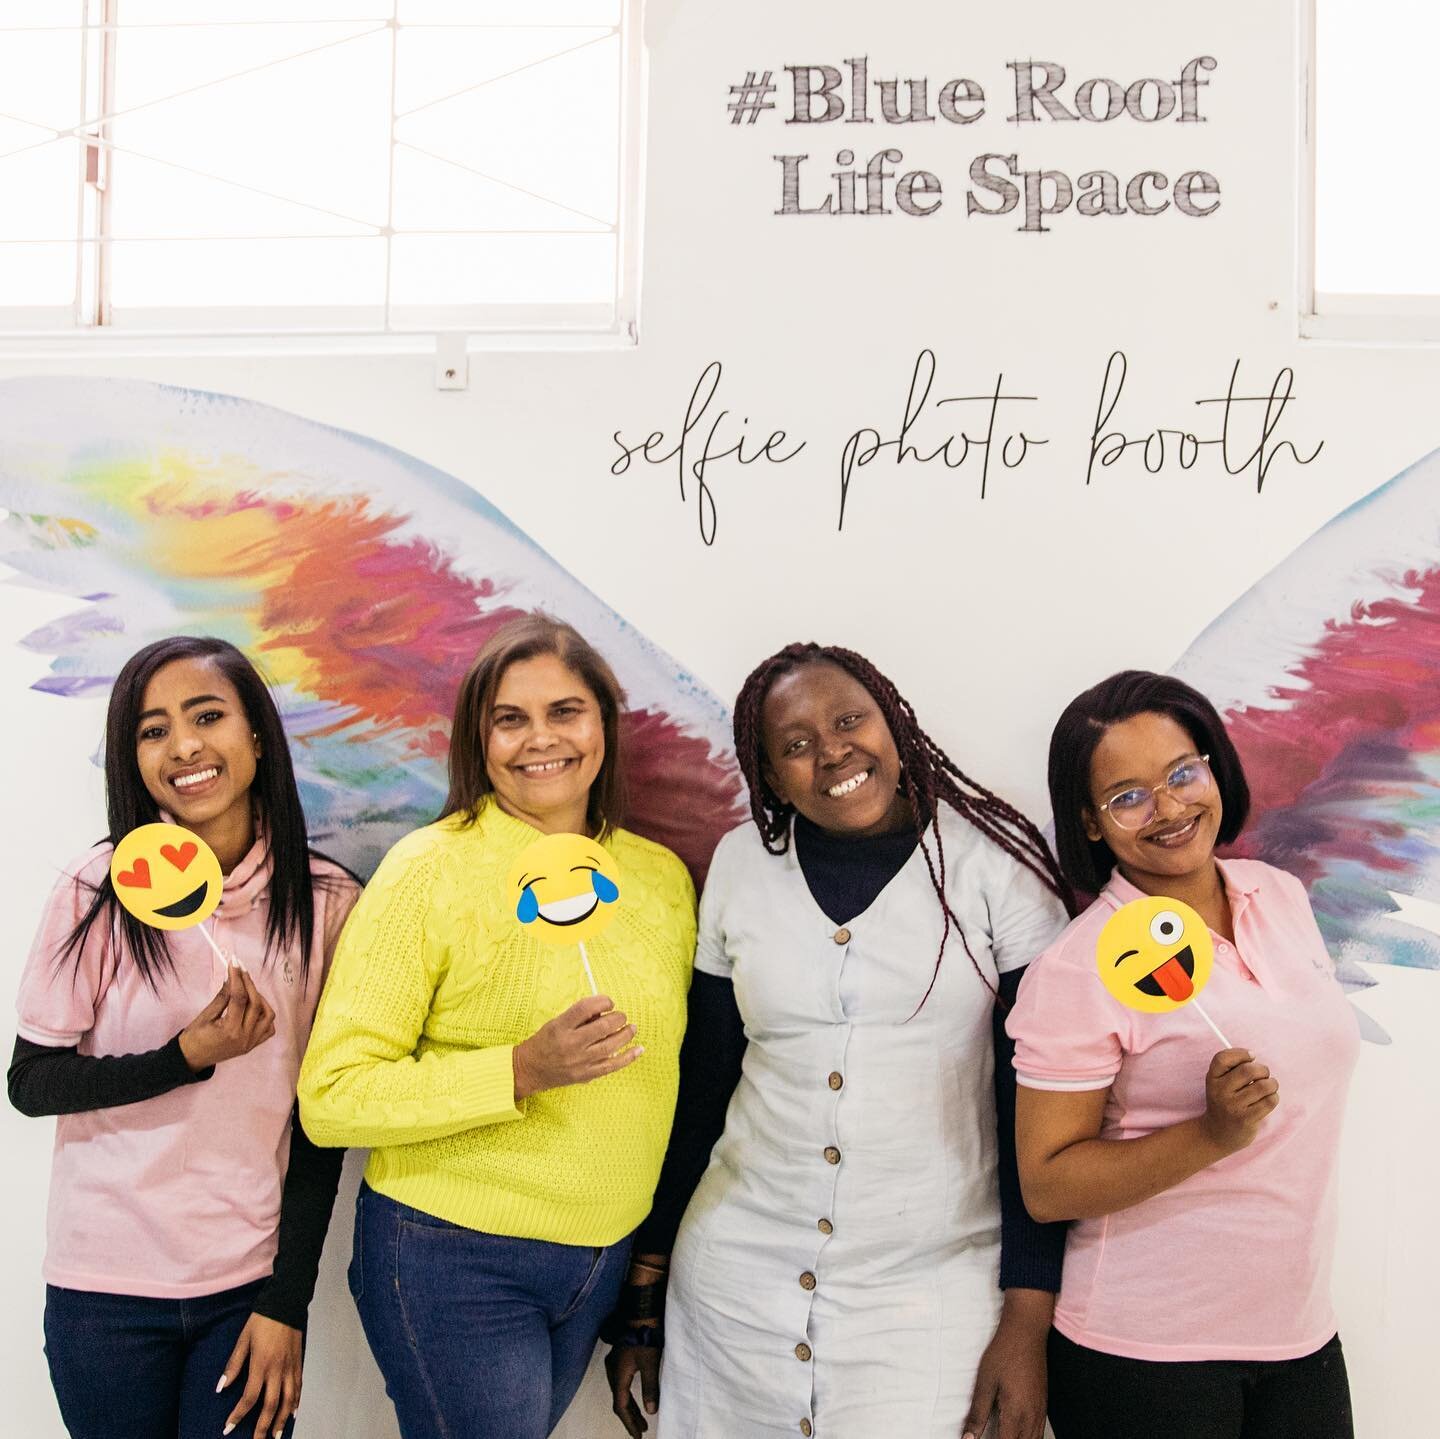 Blue Roof invites you to a new monthly Market happening the FIRST SATURDAY of every month, with the launch event taking place @ Blue Roof on Sat 3 October from 9:00 to 13:00.
.
.
Join us for a fun-filled day, with well-priced stalls, a variety of gre